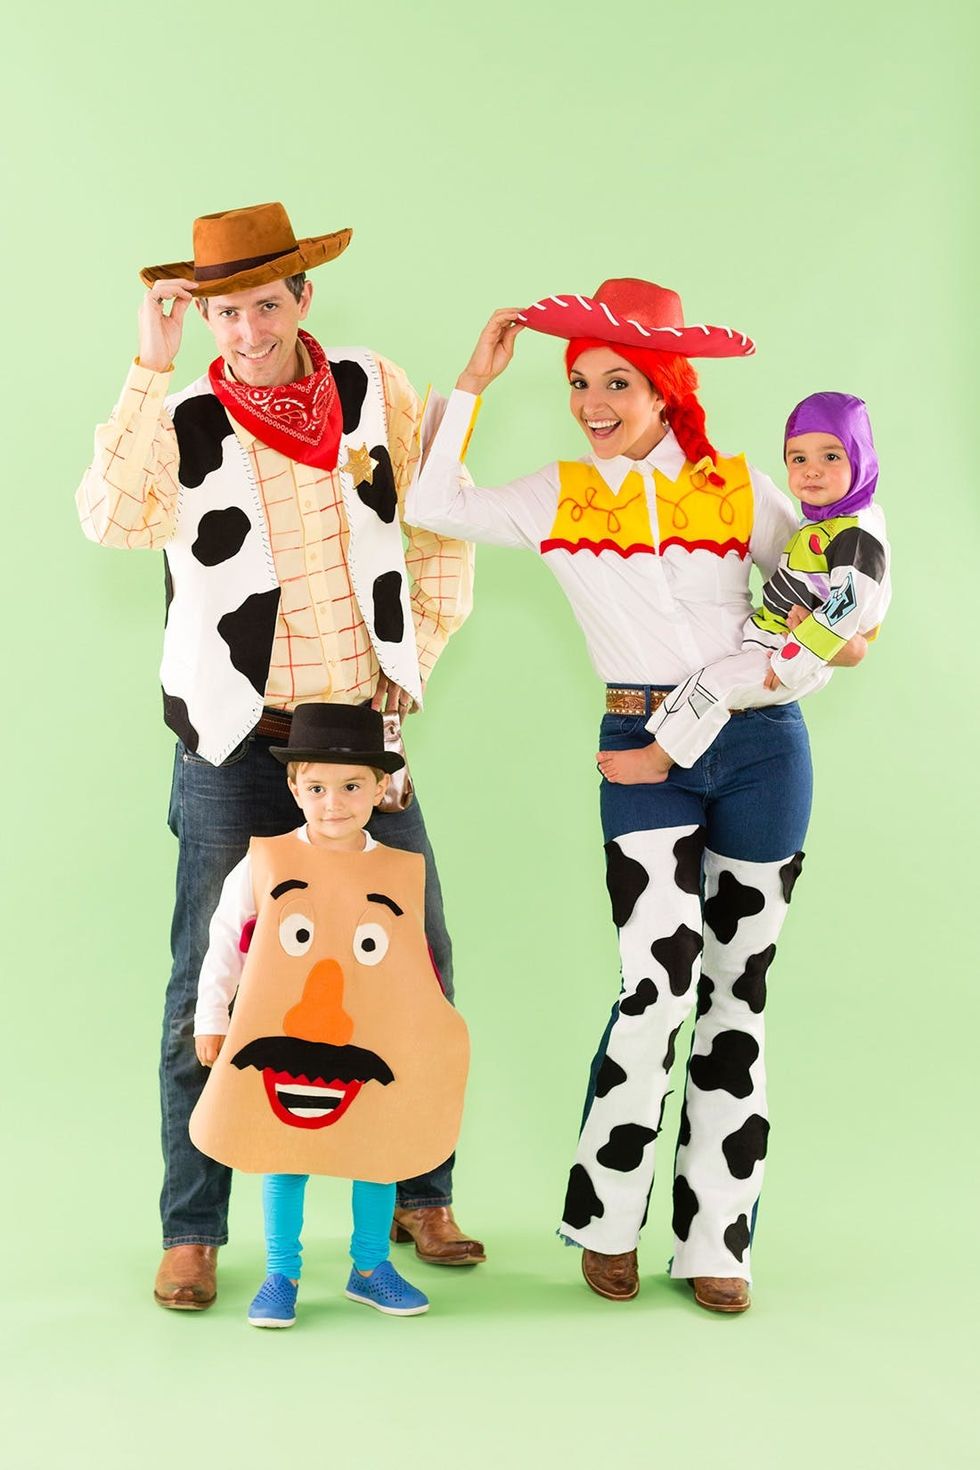 Toy Story Costumes